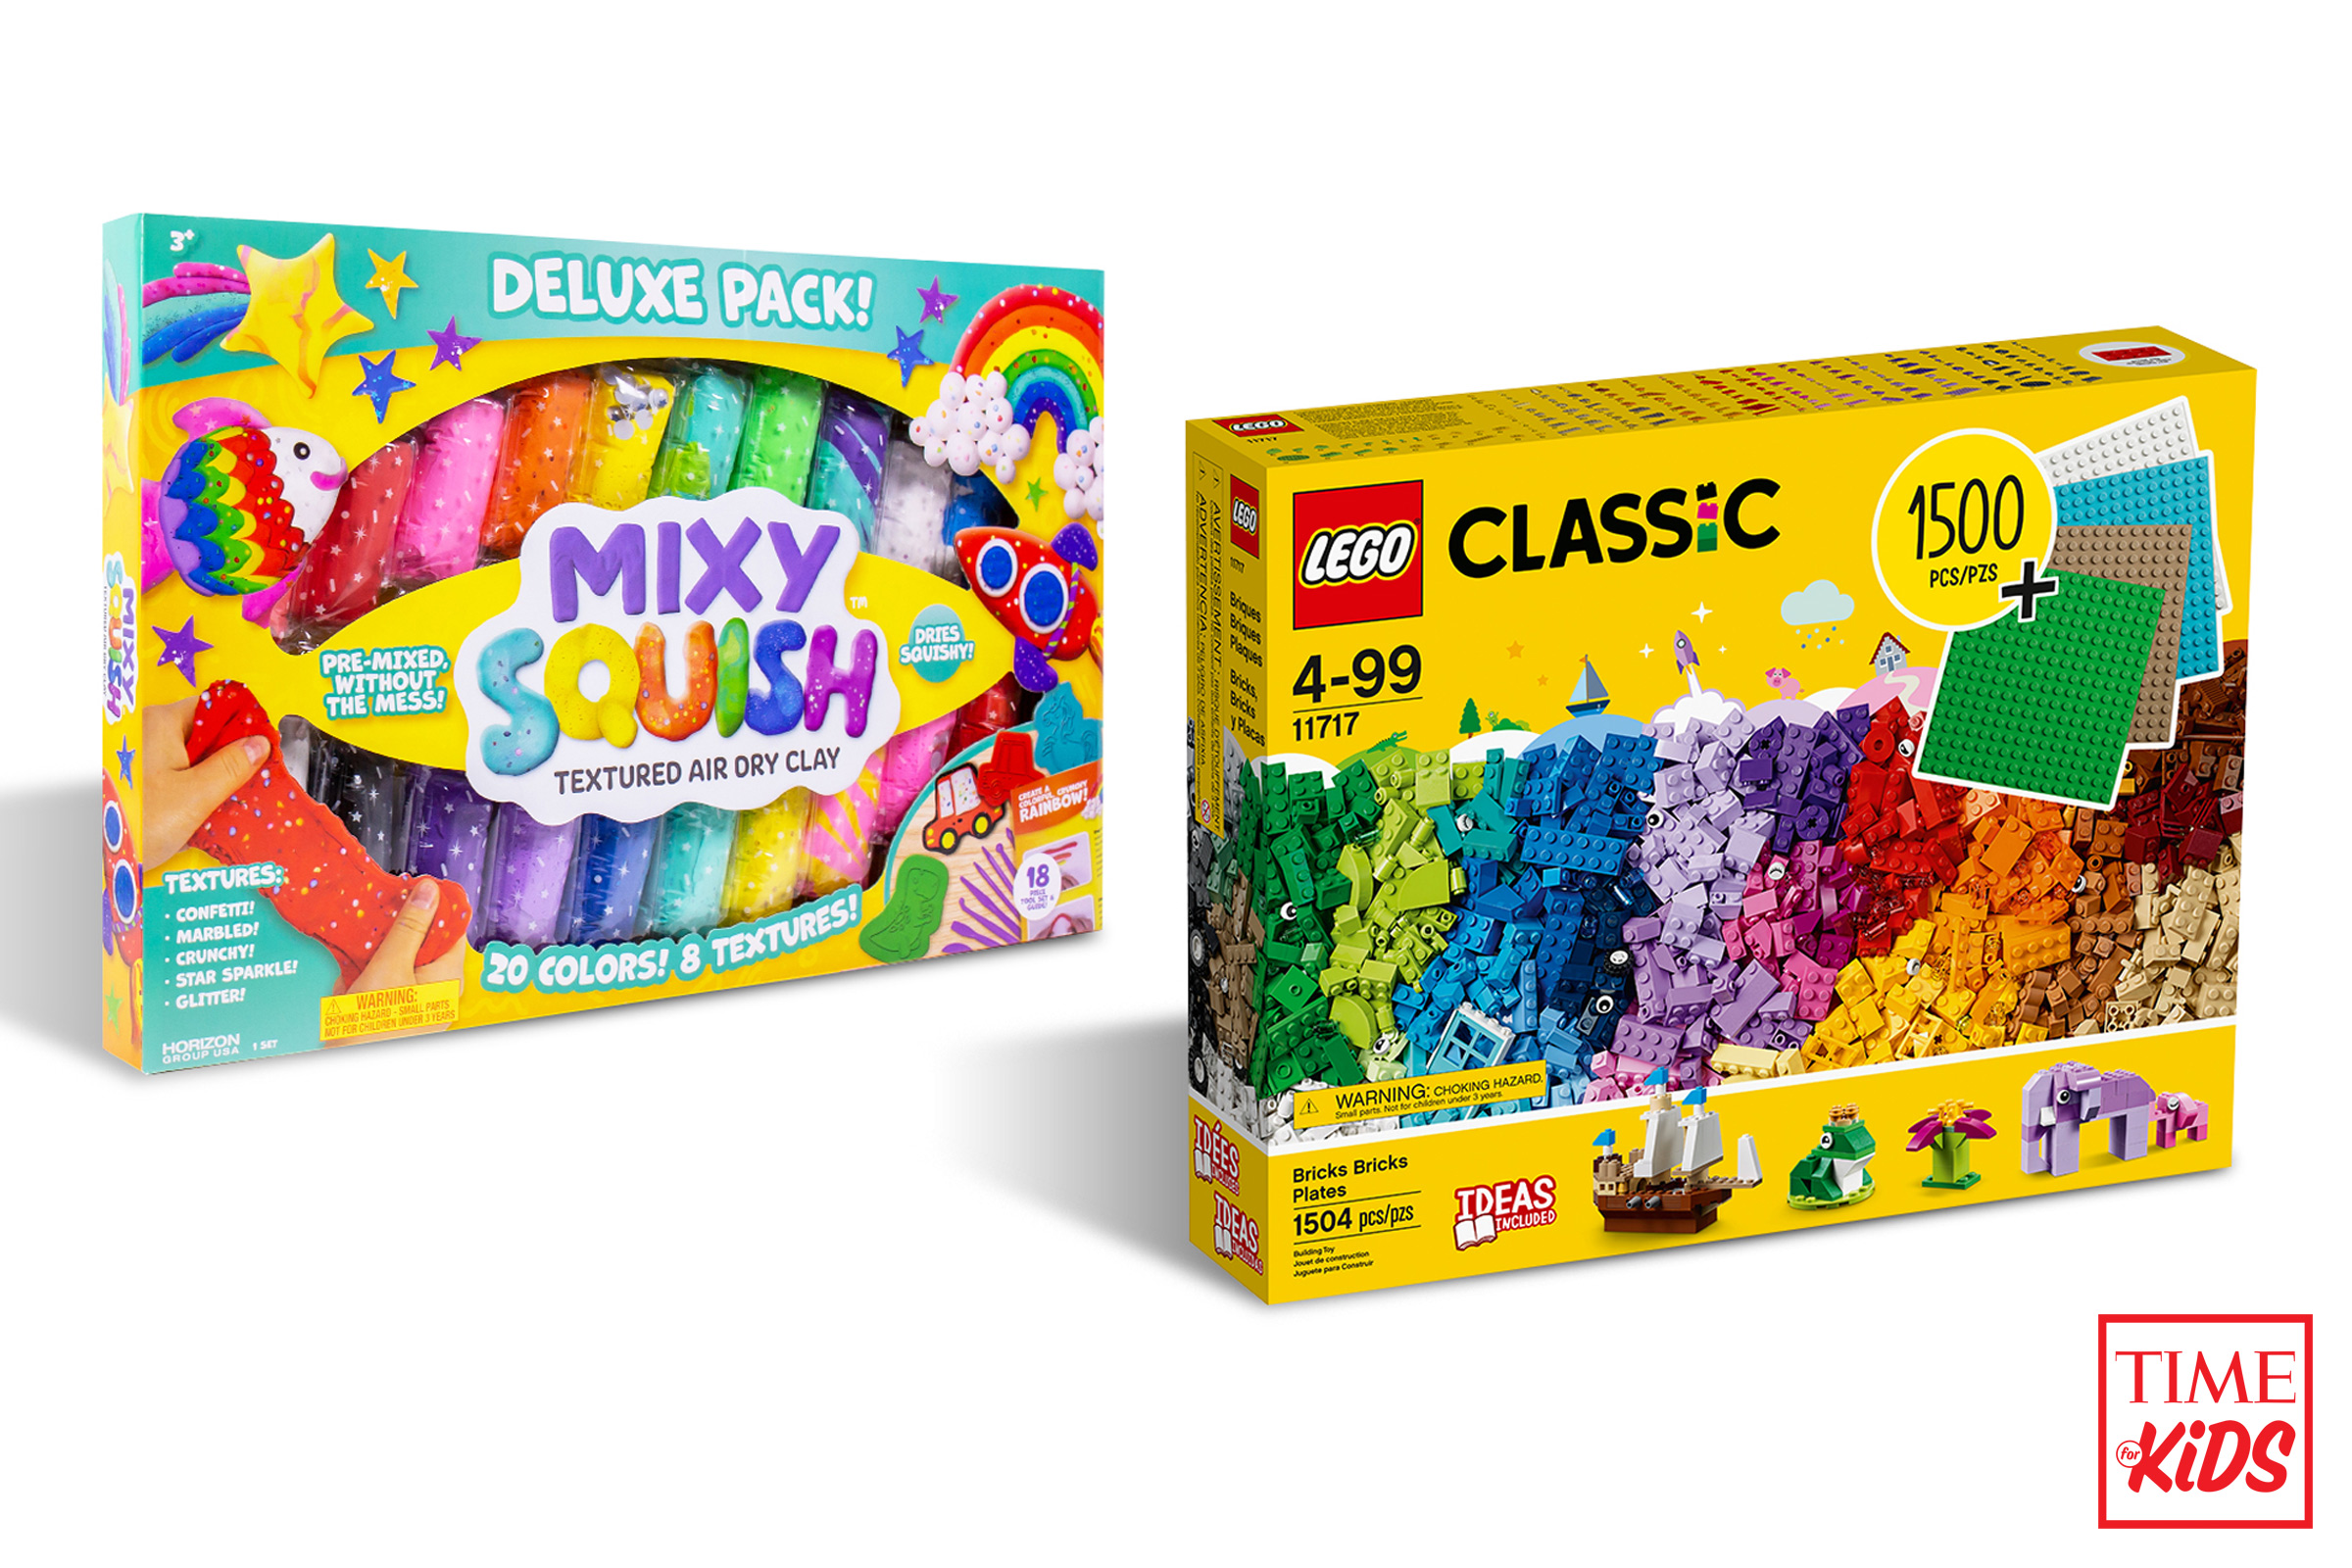 Picture of Mixy Squish and Lego Classic for toy guide.